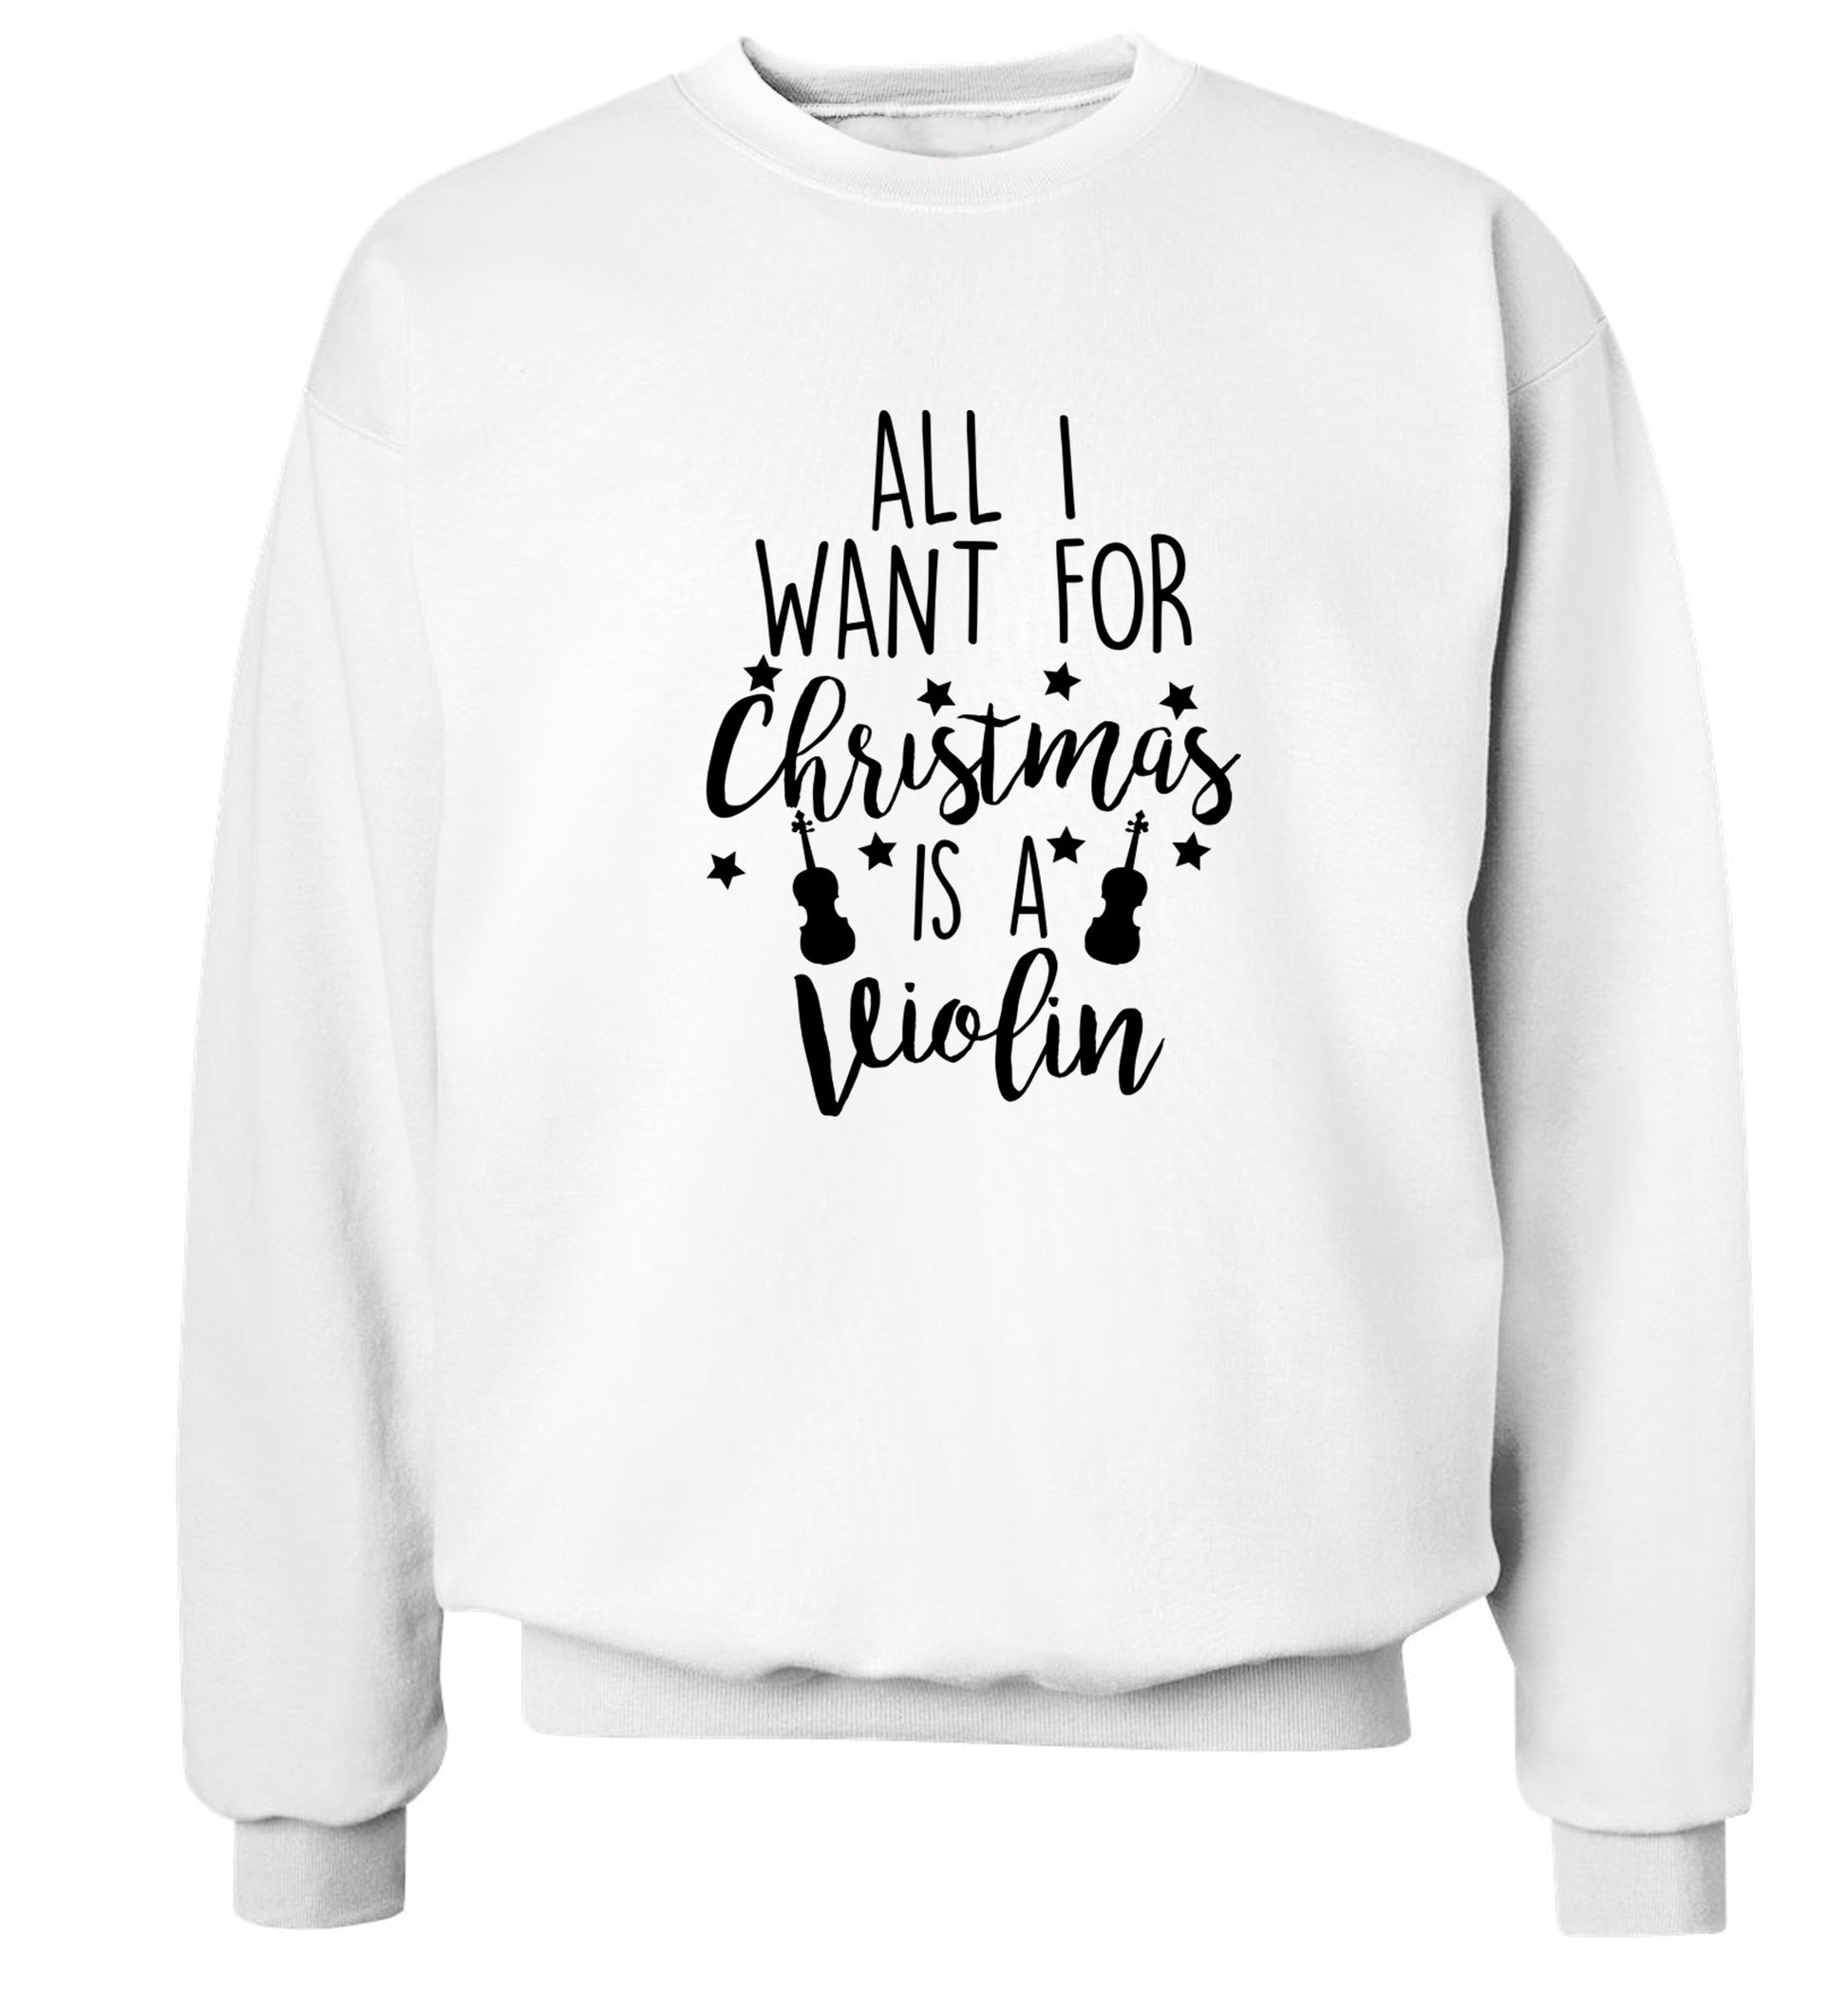 All I Want For Christmas is a Violin Adult's unisex white Sweater 2XL